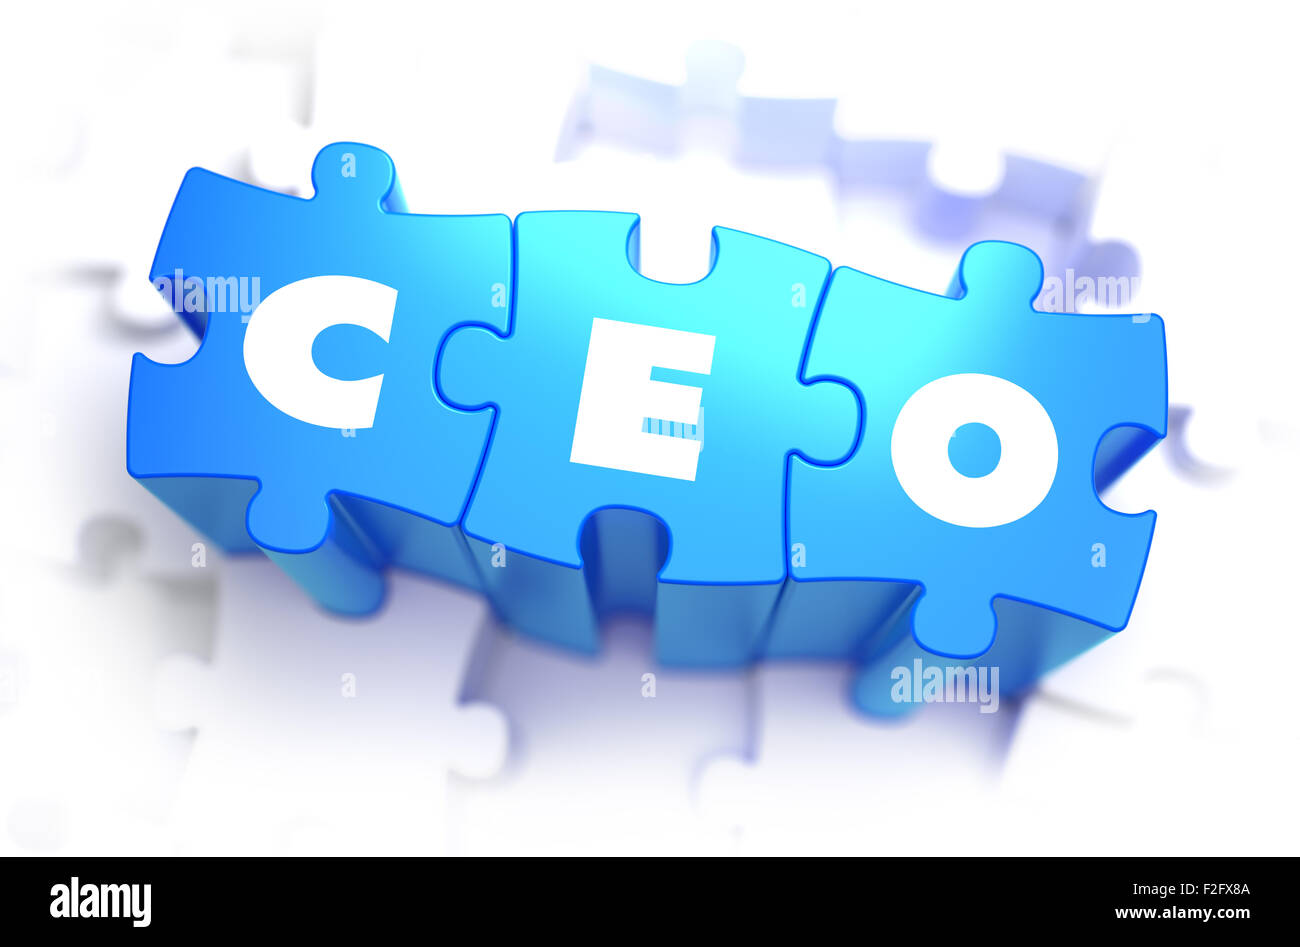 CEO - Chief Executive Officer - White Word on Blue Puzzles on White Background. 3D Illustration. Stock Photo